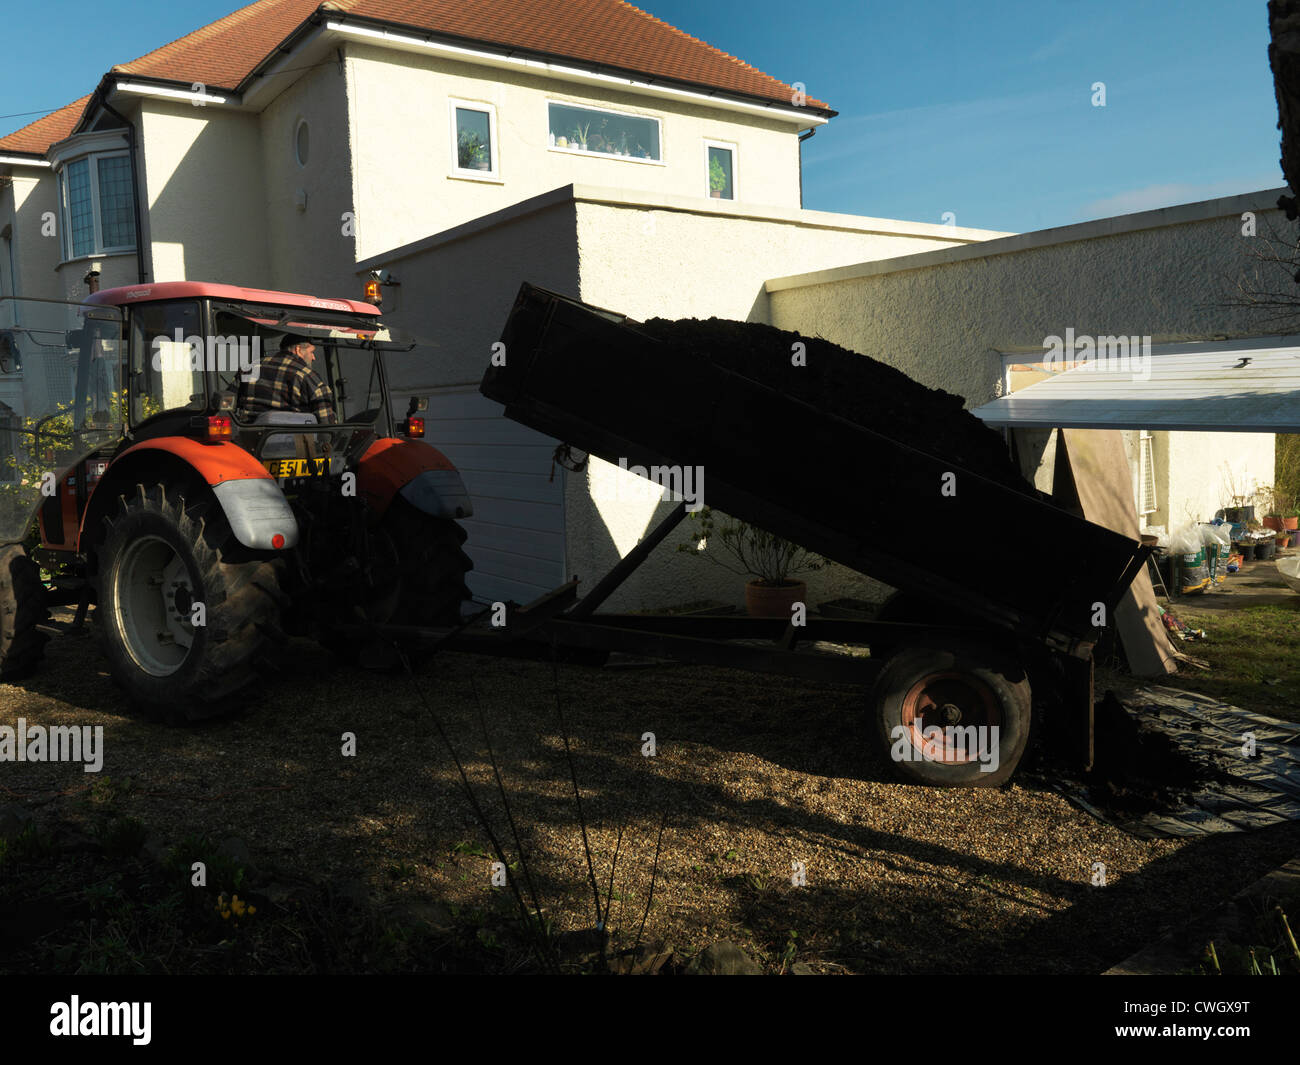 tractor Delivering horse Manure For Garden cheam Surrey England Stock Photo